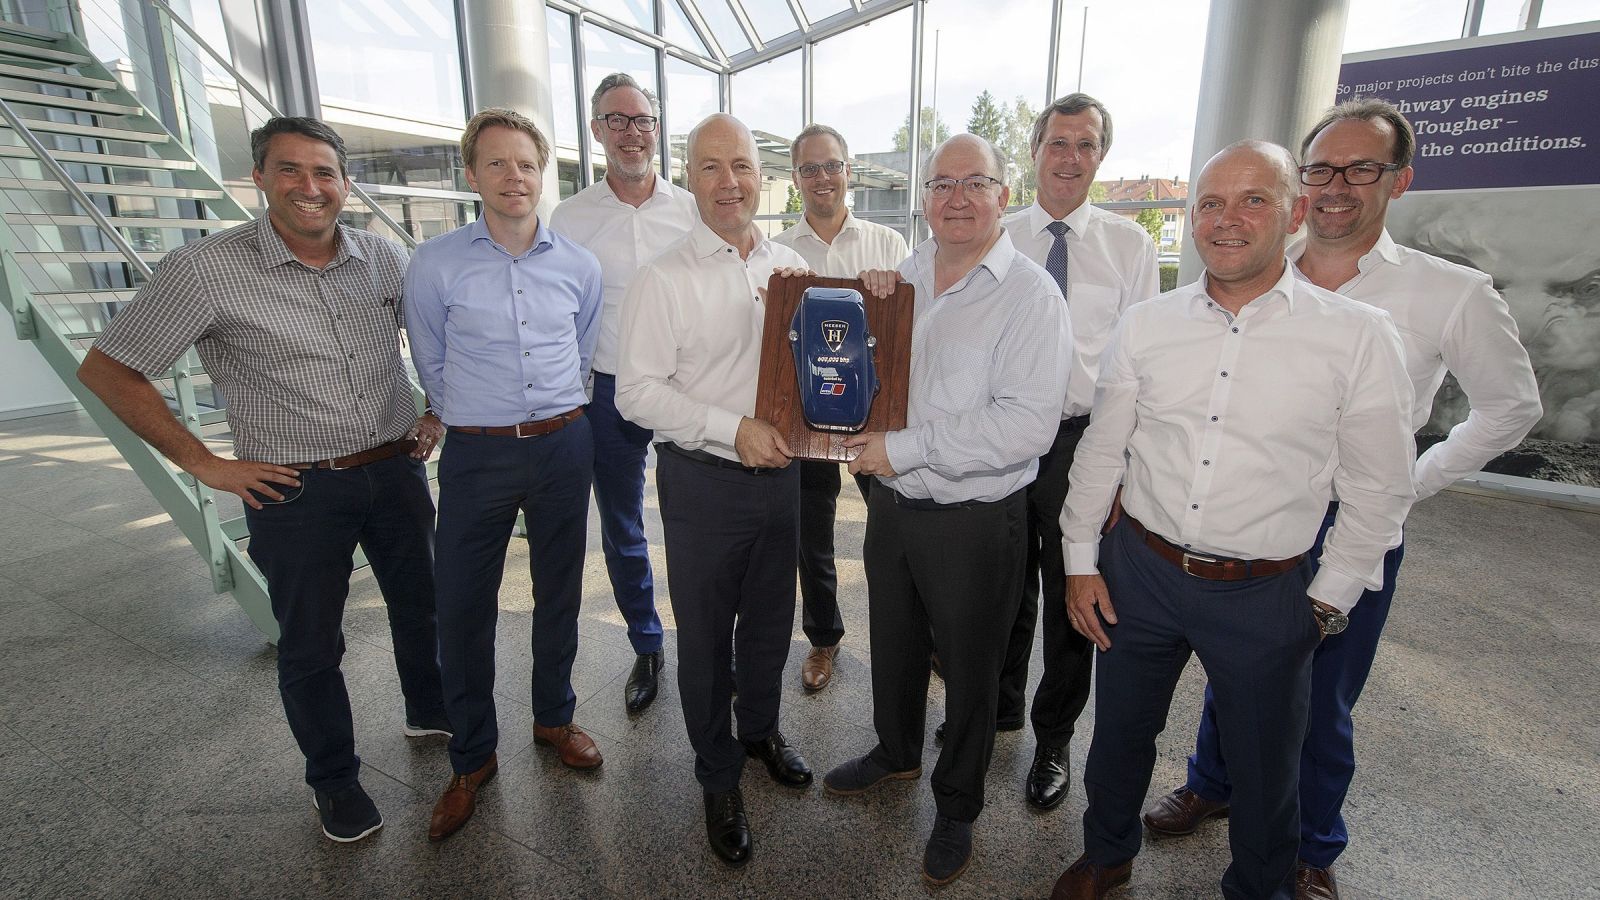 Heesen Yards has received an award from MTU - for a total installed power of 600,000 bhp. Happy about the award and the long-standing relationship are in the middle with the award: Arthur Brouwer (CEO of Heesen) and Knut M?ller (Head of governmental & marine business at MTU), from left to right: Jochen Kuhn (Sales Manager Yacht MTU), Nils Vaessen (CFO Heesen), Perry Kuiper (CEO MTU Benelux), Dennis Zumbach (Head of marine & offshore sales Europe, Middle East, Africa MTU), Mark Cavendish (Sales & Managing Director Heesen), Wouter Hoek (Sales MTU Benelux) and Rick van der Wetering (Director Operations Heesen)